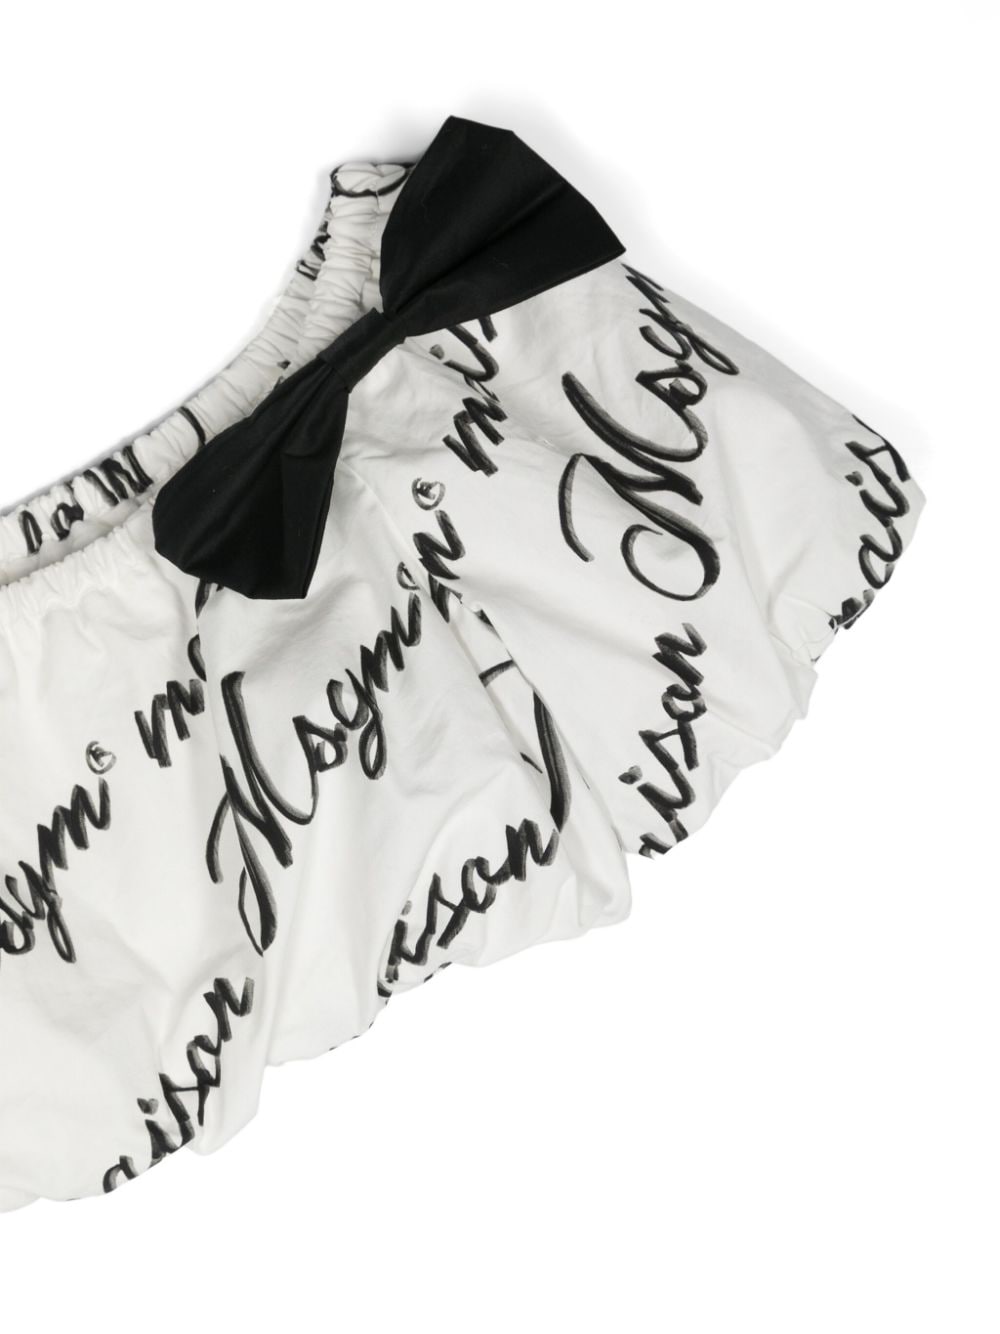 Black and white top for boys with all-over logo